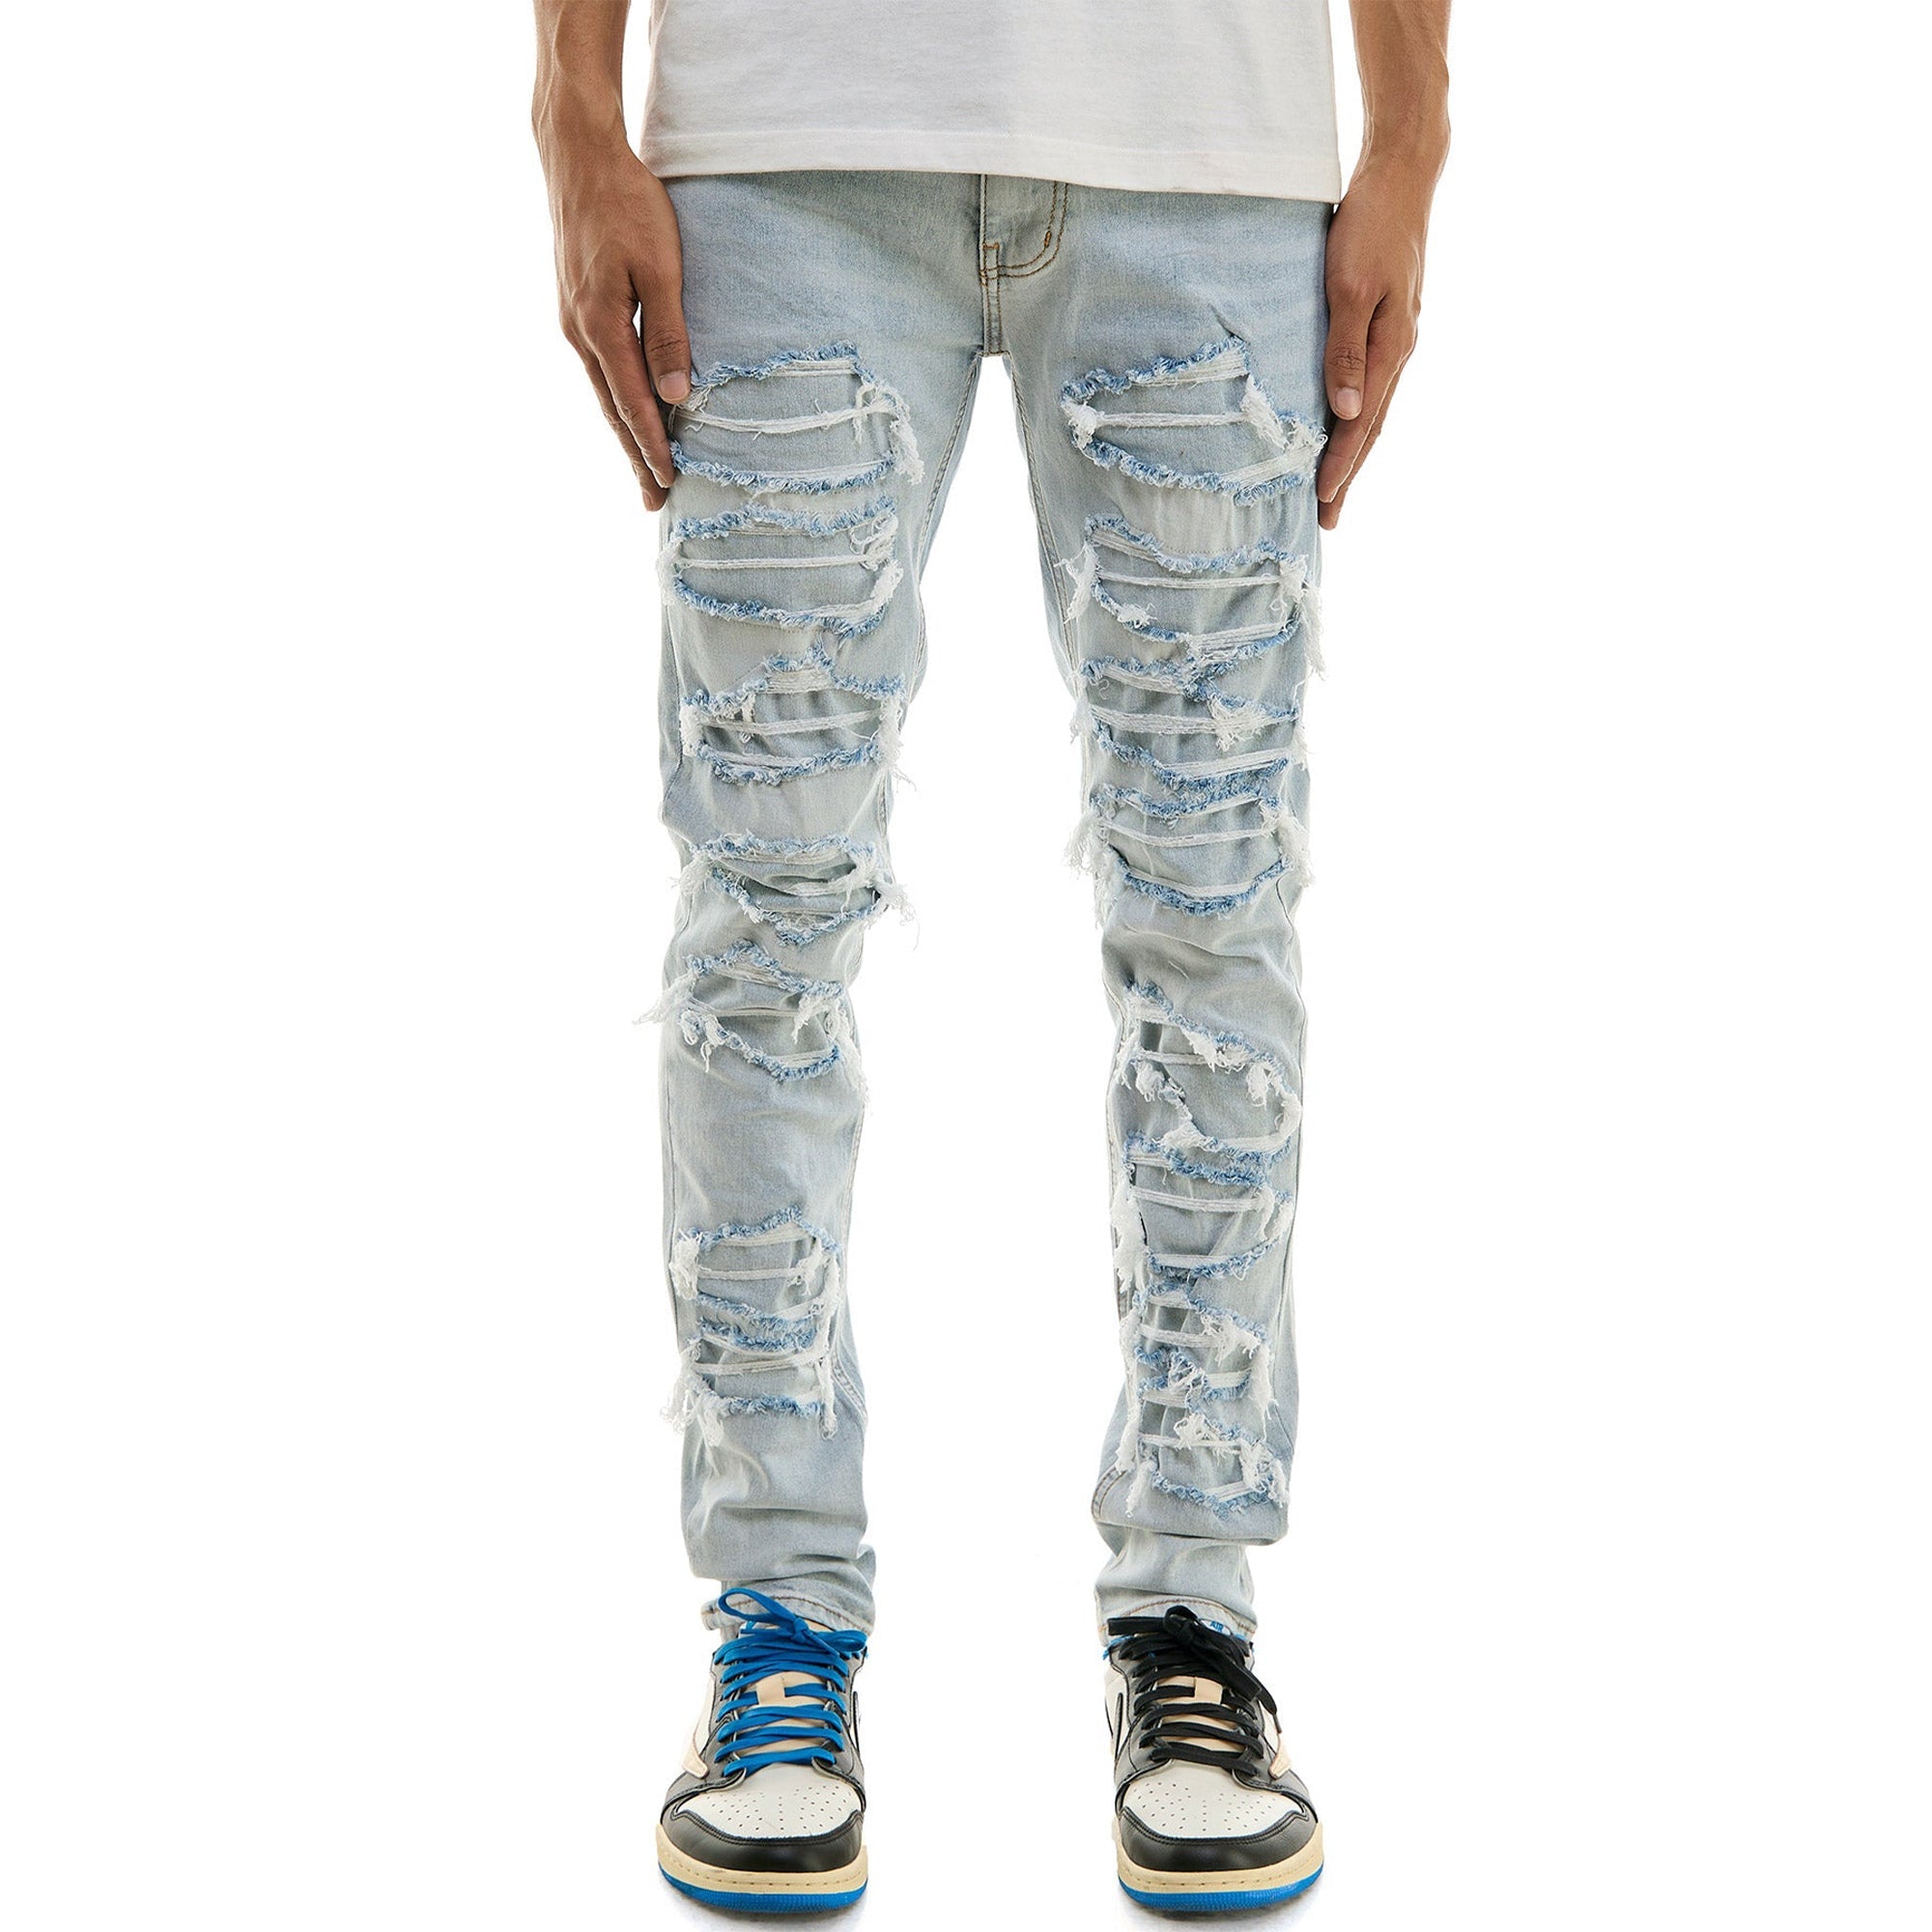 KDNK Men Under Patched High Skinny Jeans (Blue)-Blue-28W X 32L-Nexus Clothing